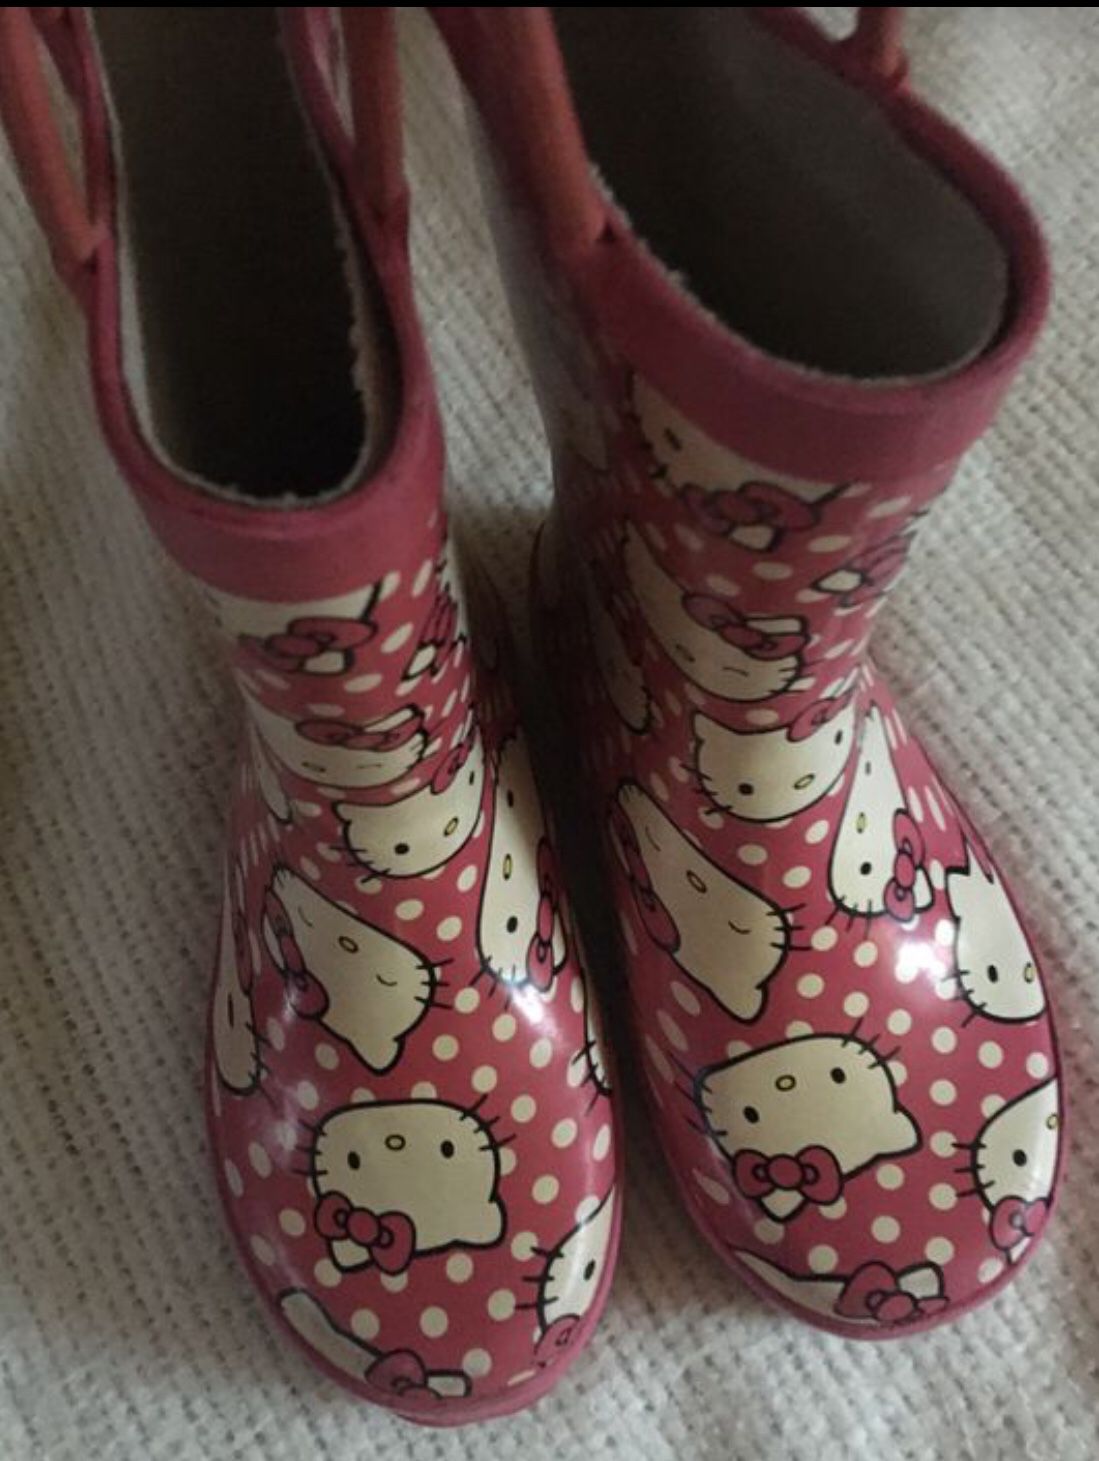 Girls hello kitty rain boots. Size 9/10c. Minor fading, otherwise in good condition